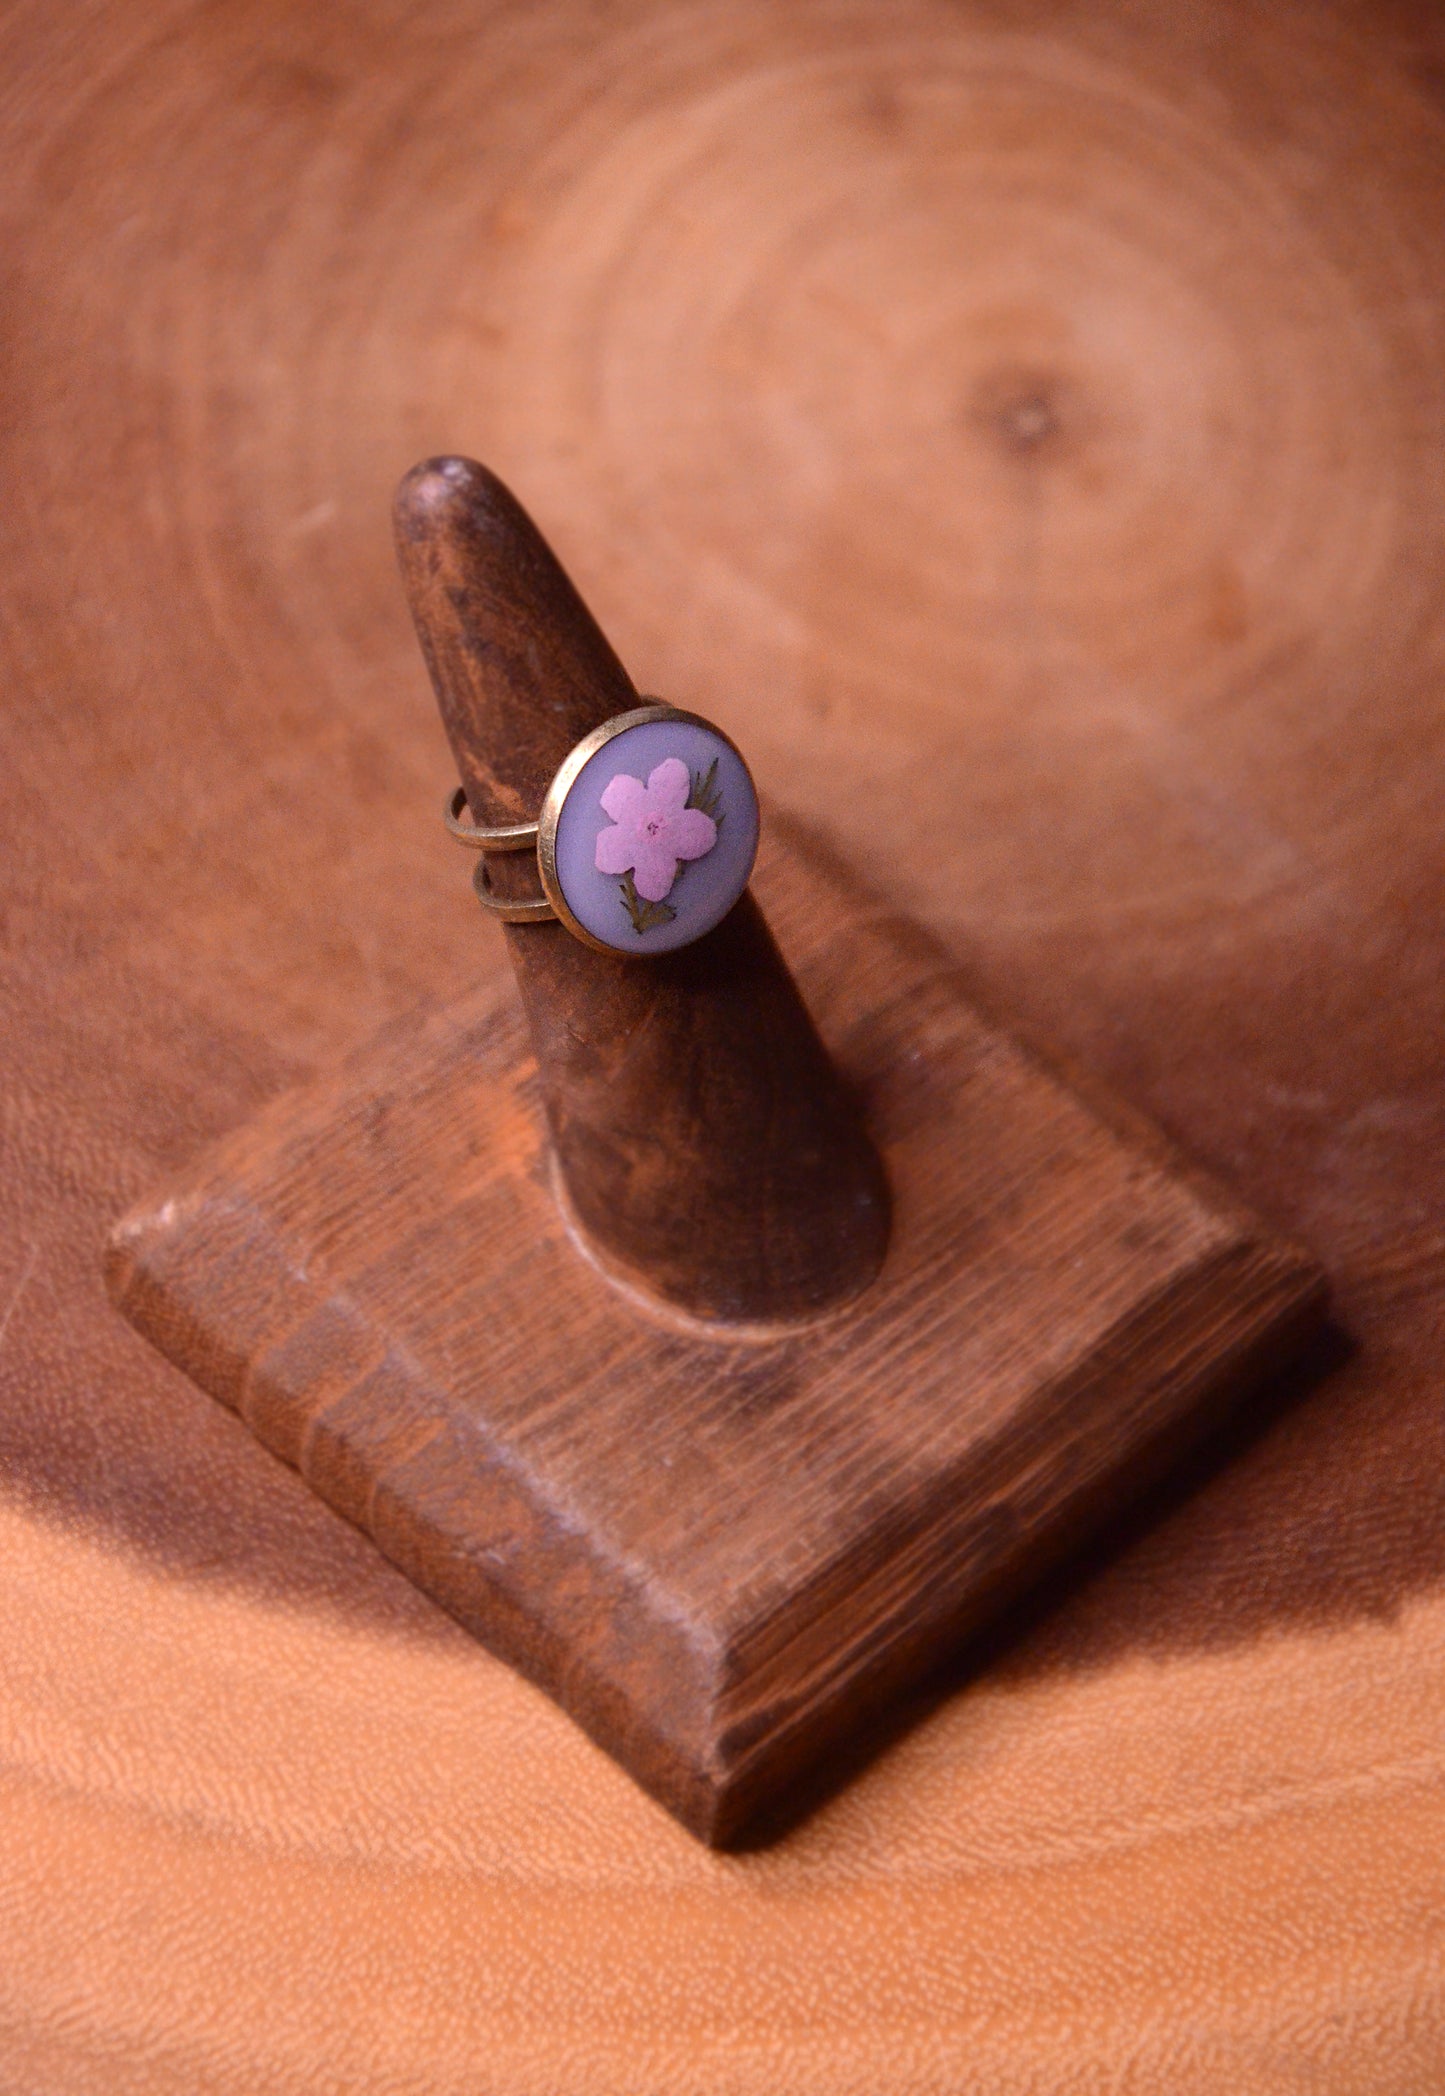 Antique Bronze Adjustable Ring with White Background and Pink Forget Me Nots with Fern Tips